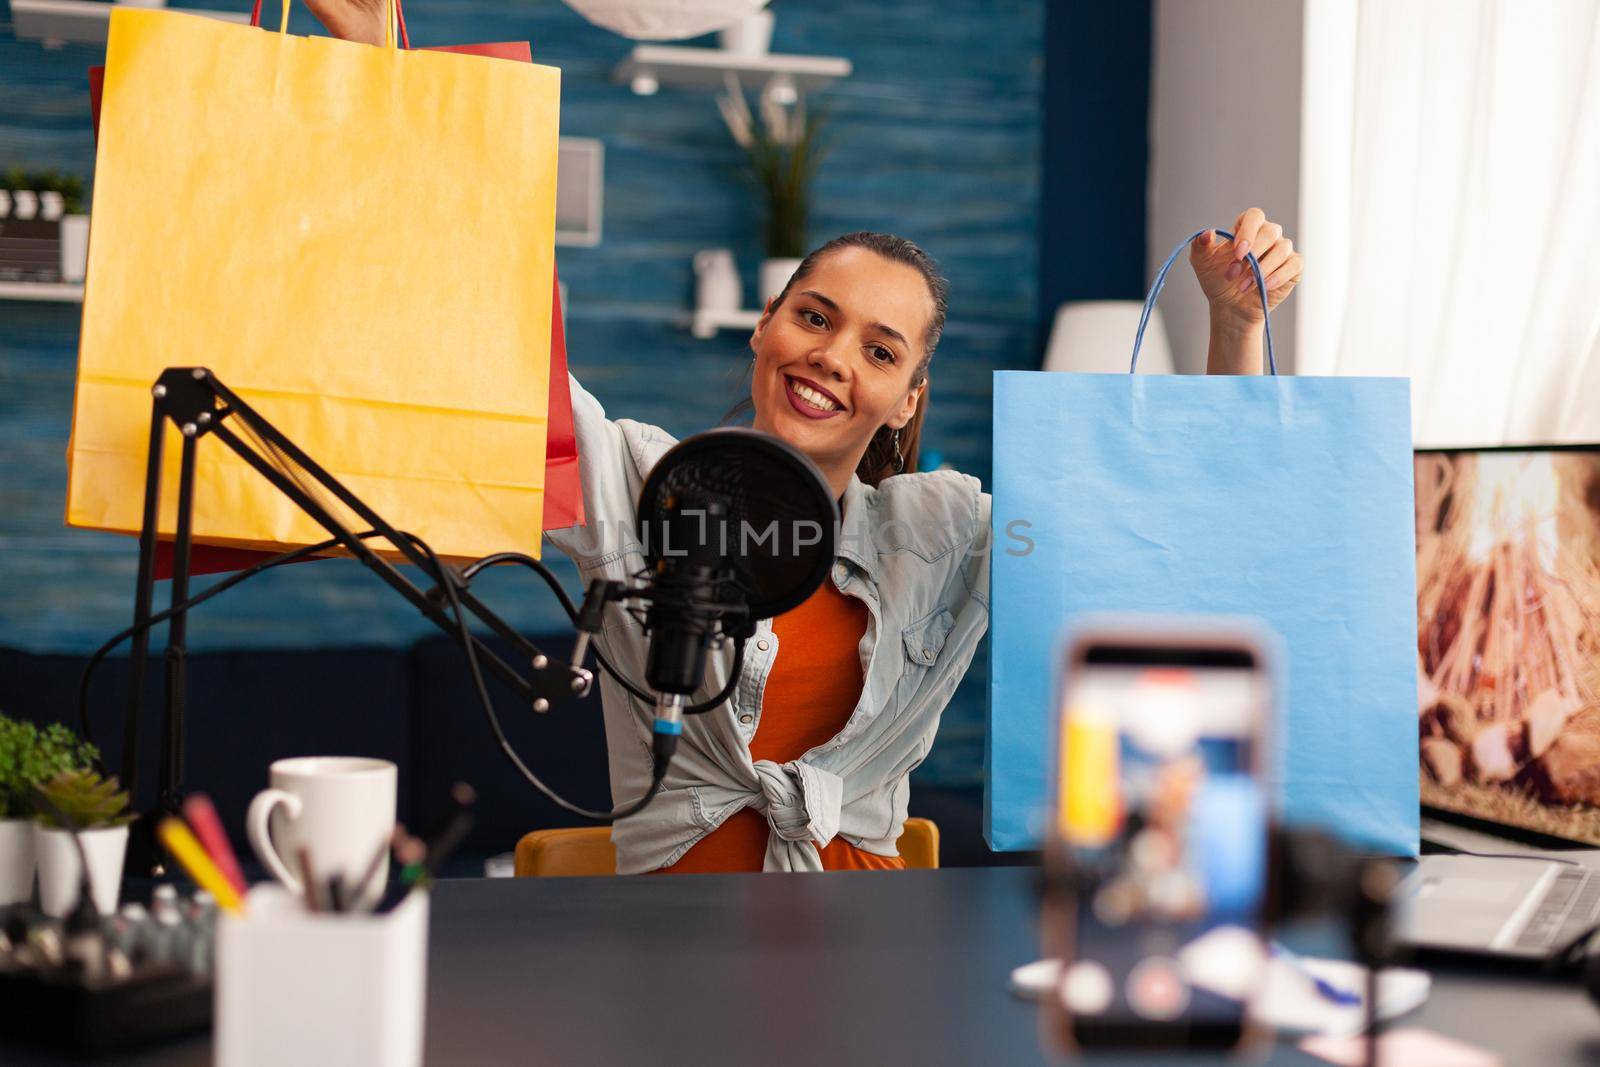 Podcast from social media vlogger with big bags gifts in home studio using professional microphone. Creative content creator influencer recording online giveaway talk show for subscribers audience